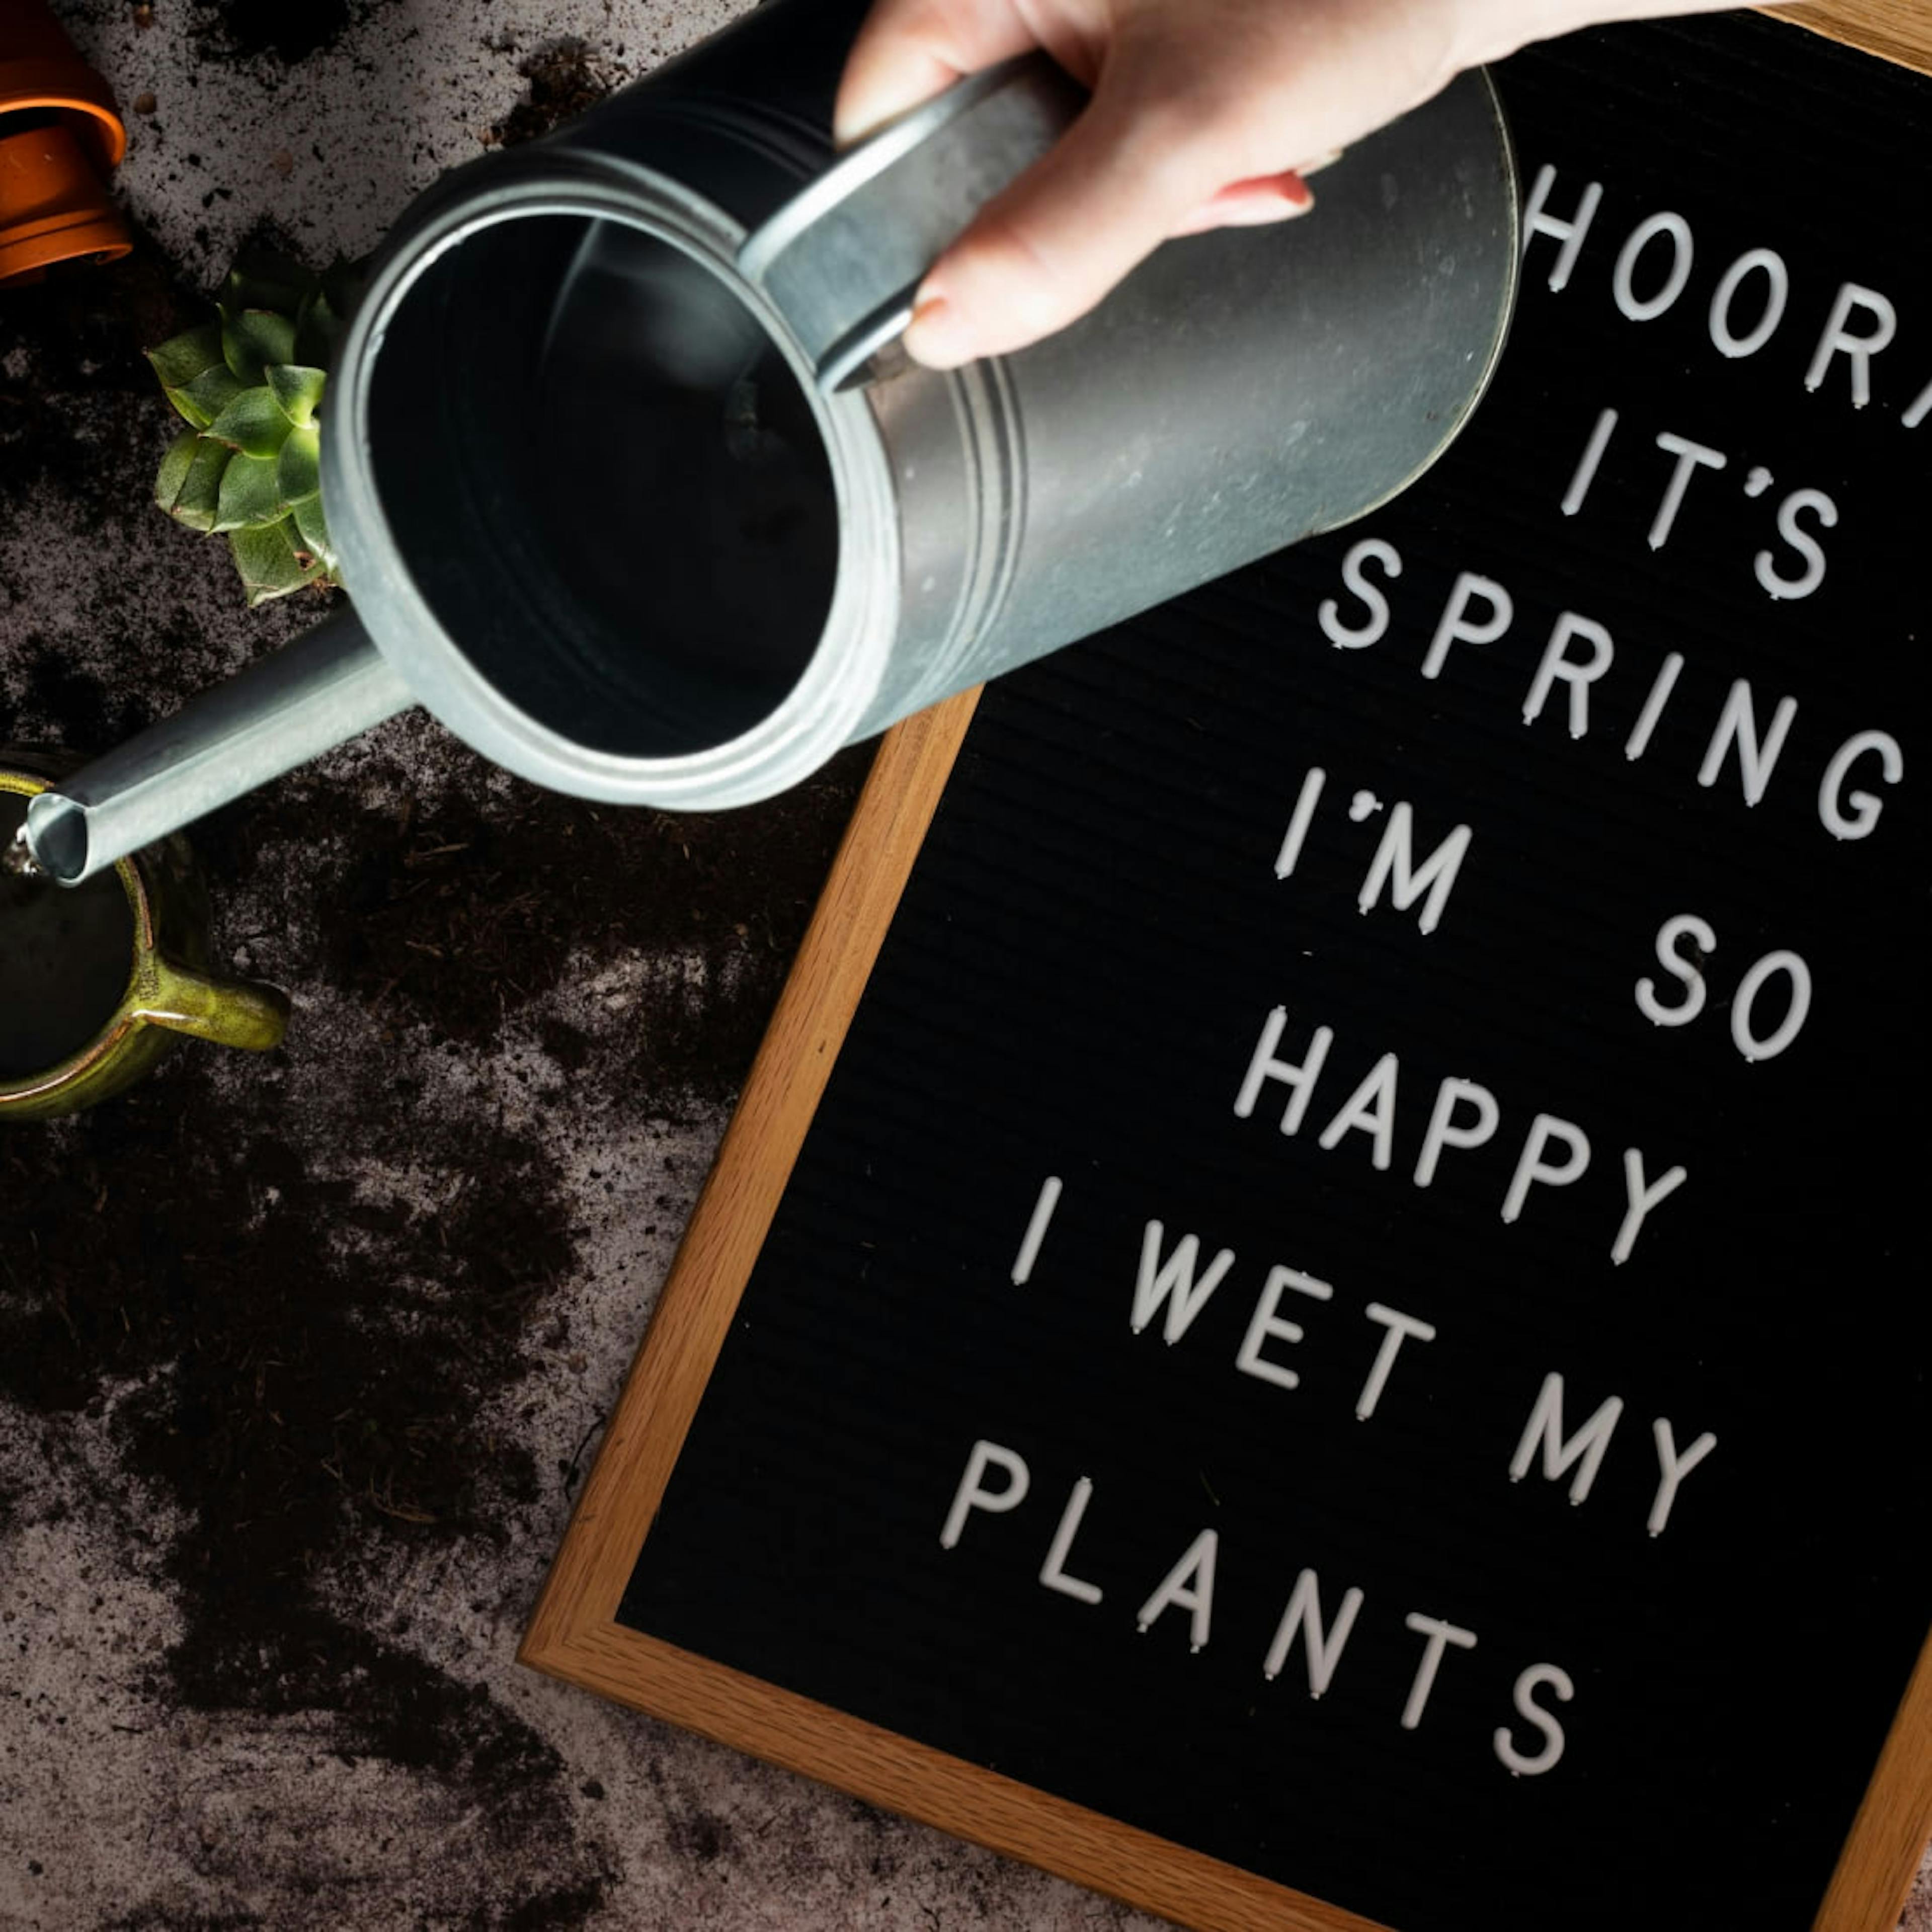 Use your own pee to wet your plants.